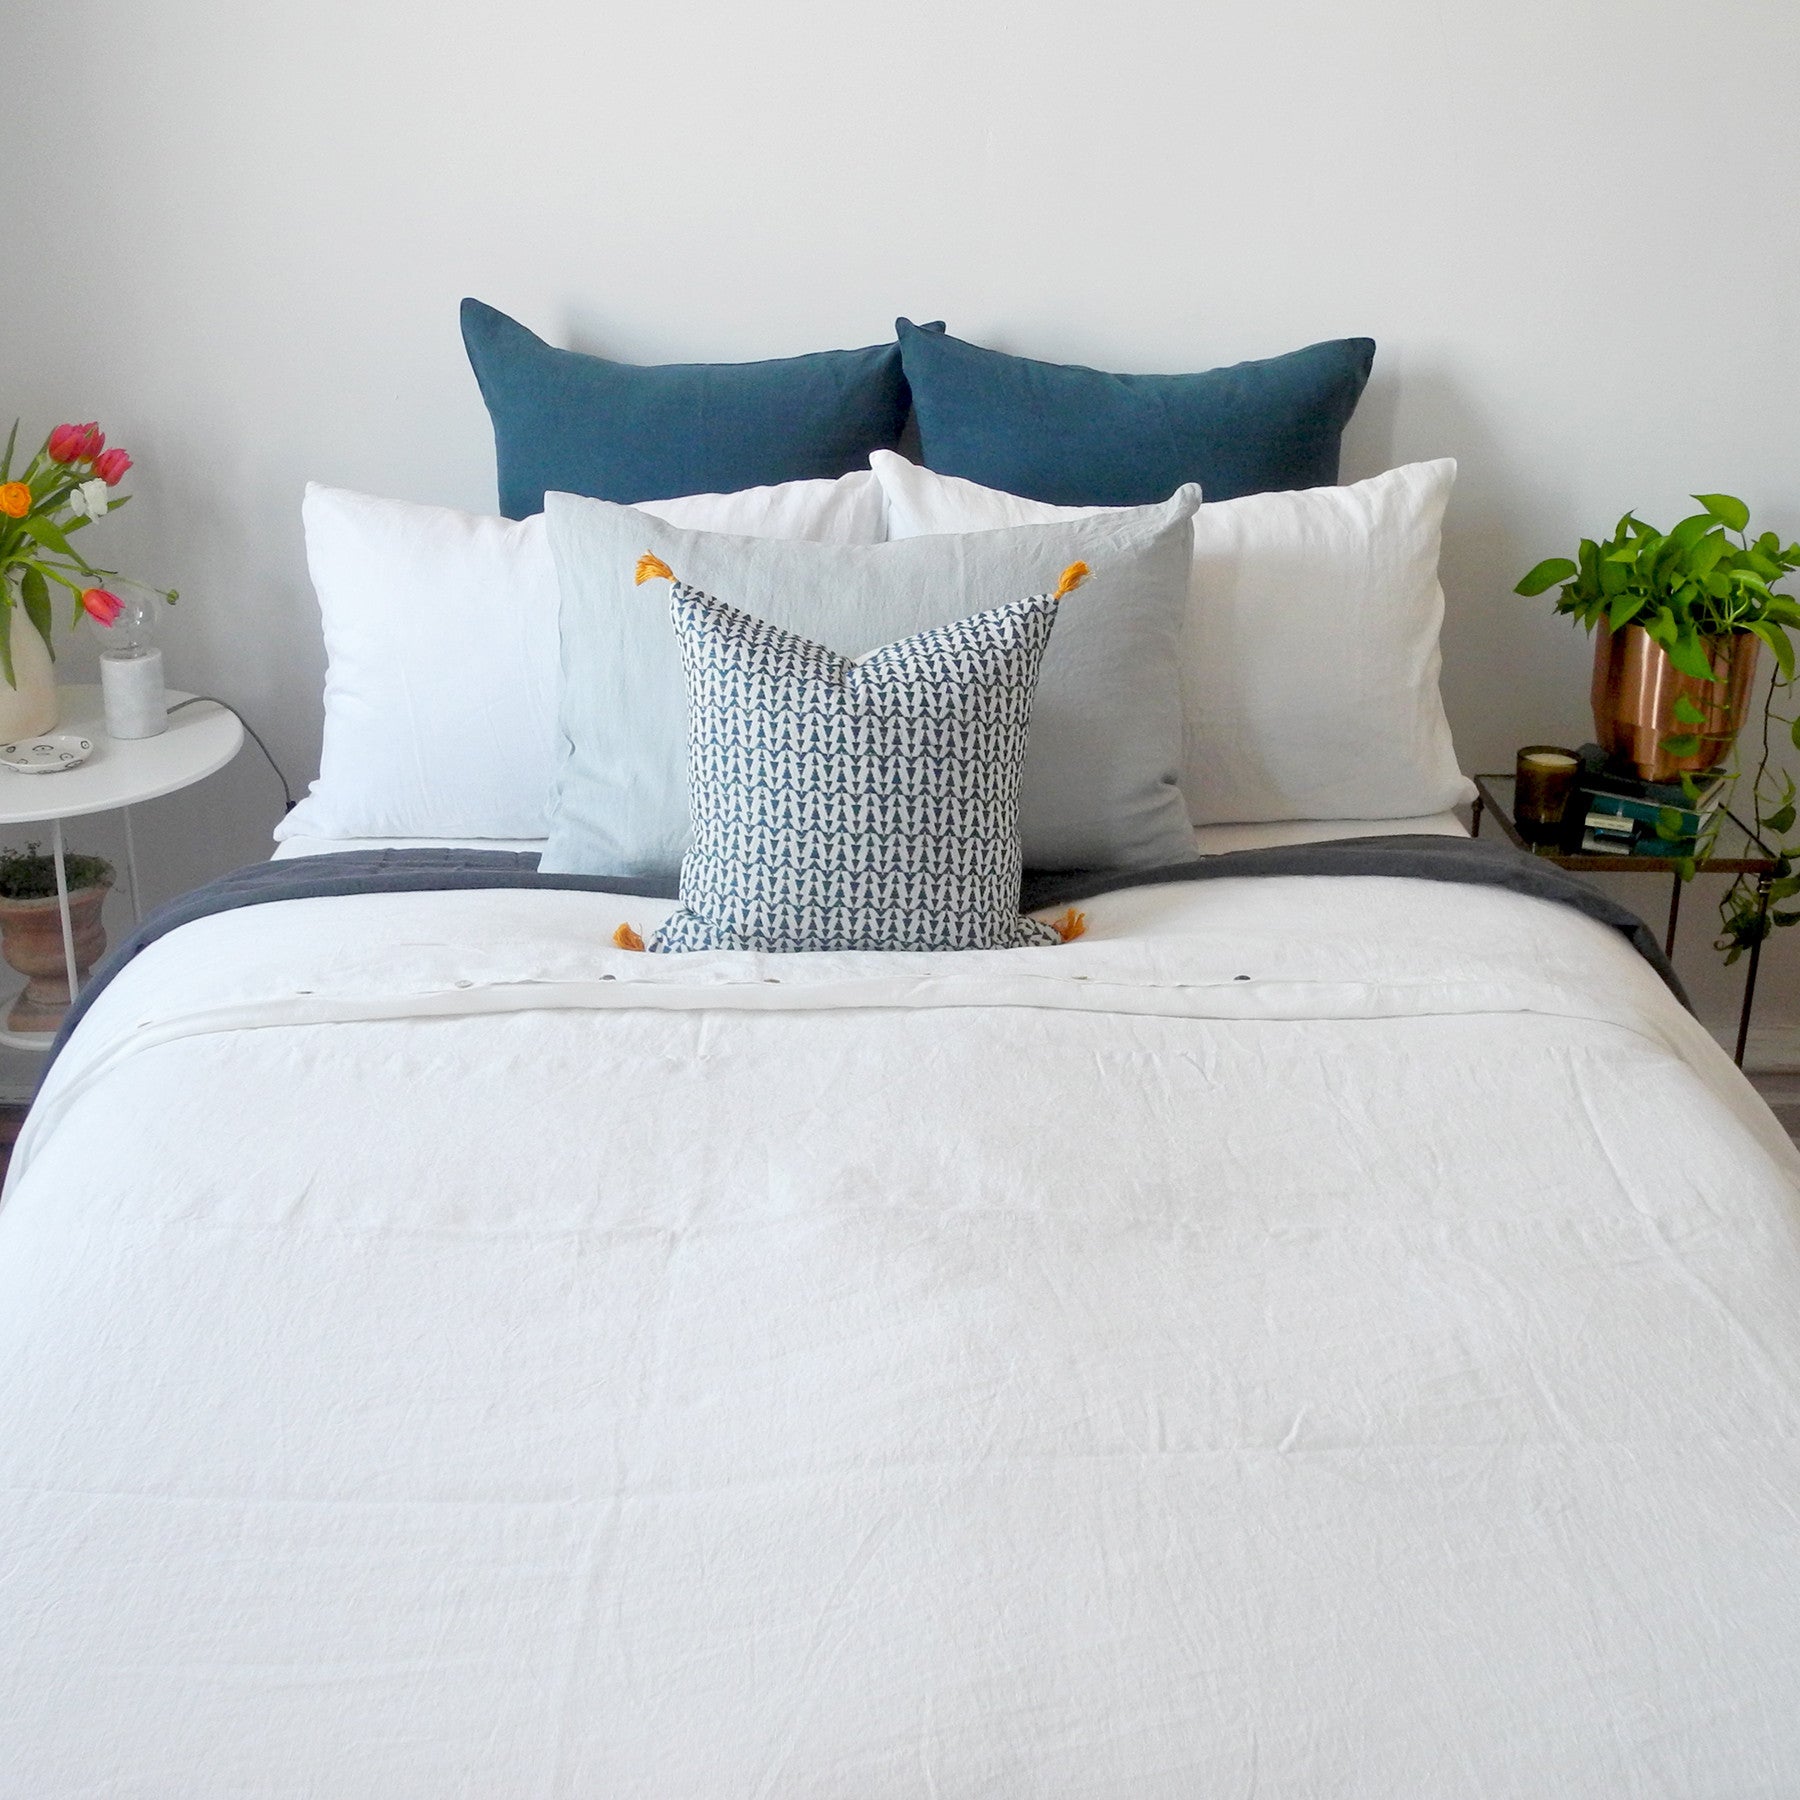 Linge Particulier Off White Standard Linen Pillowcase Sham with blue pillows for a colorful linen bedding look in soft white - Collyer&#39;s Mansion